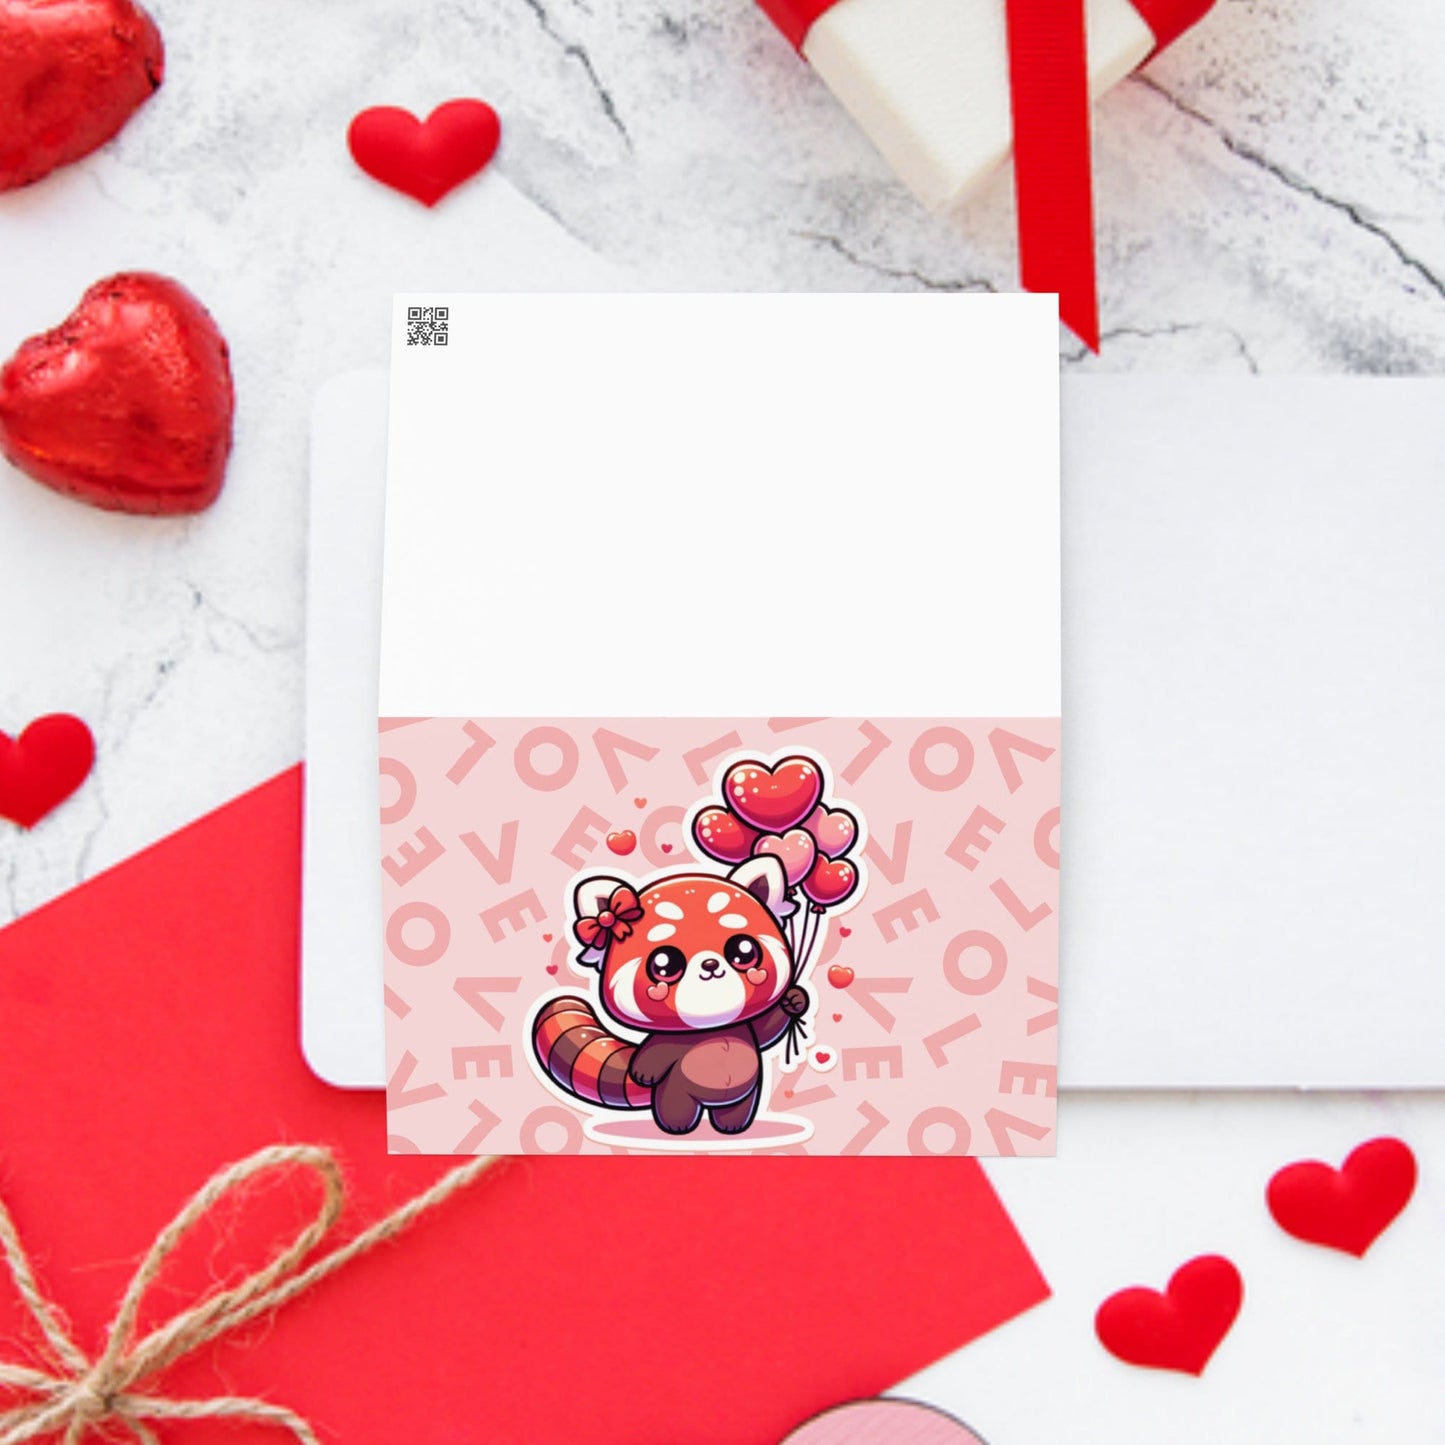 NOTECARD Red Panda with Balloons Love is in air Valentine's Day Cards Valentines GREETING CARD